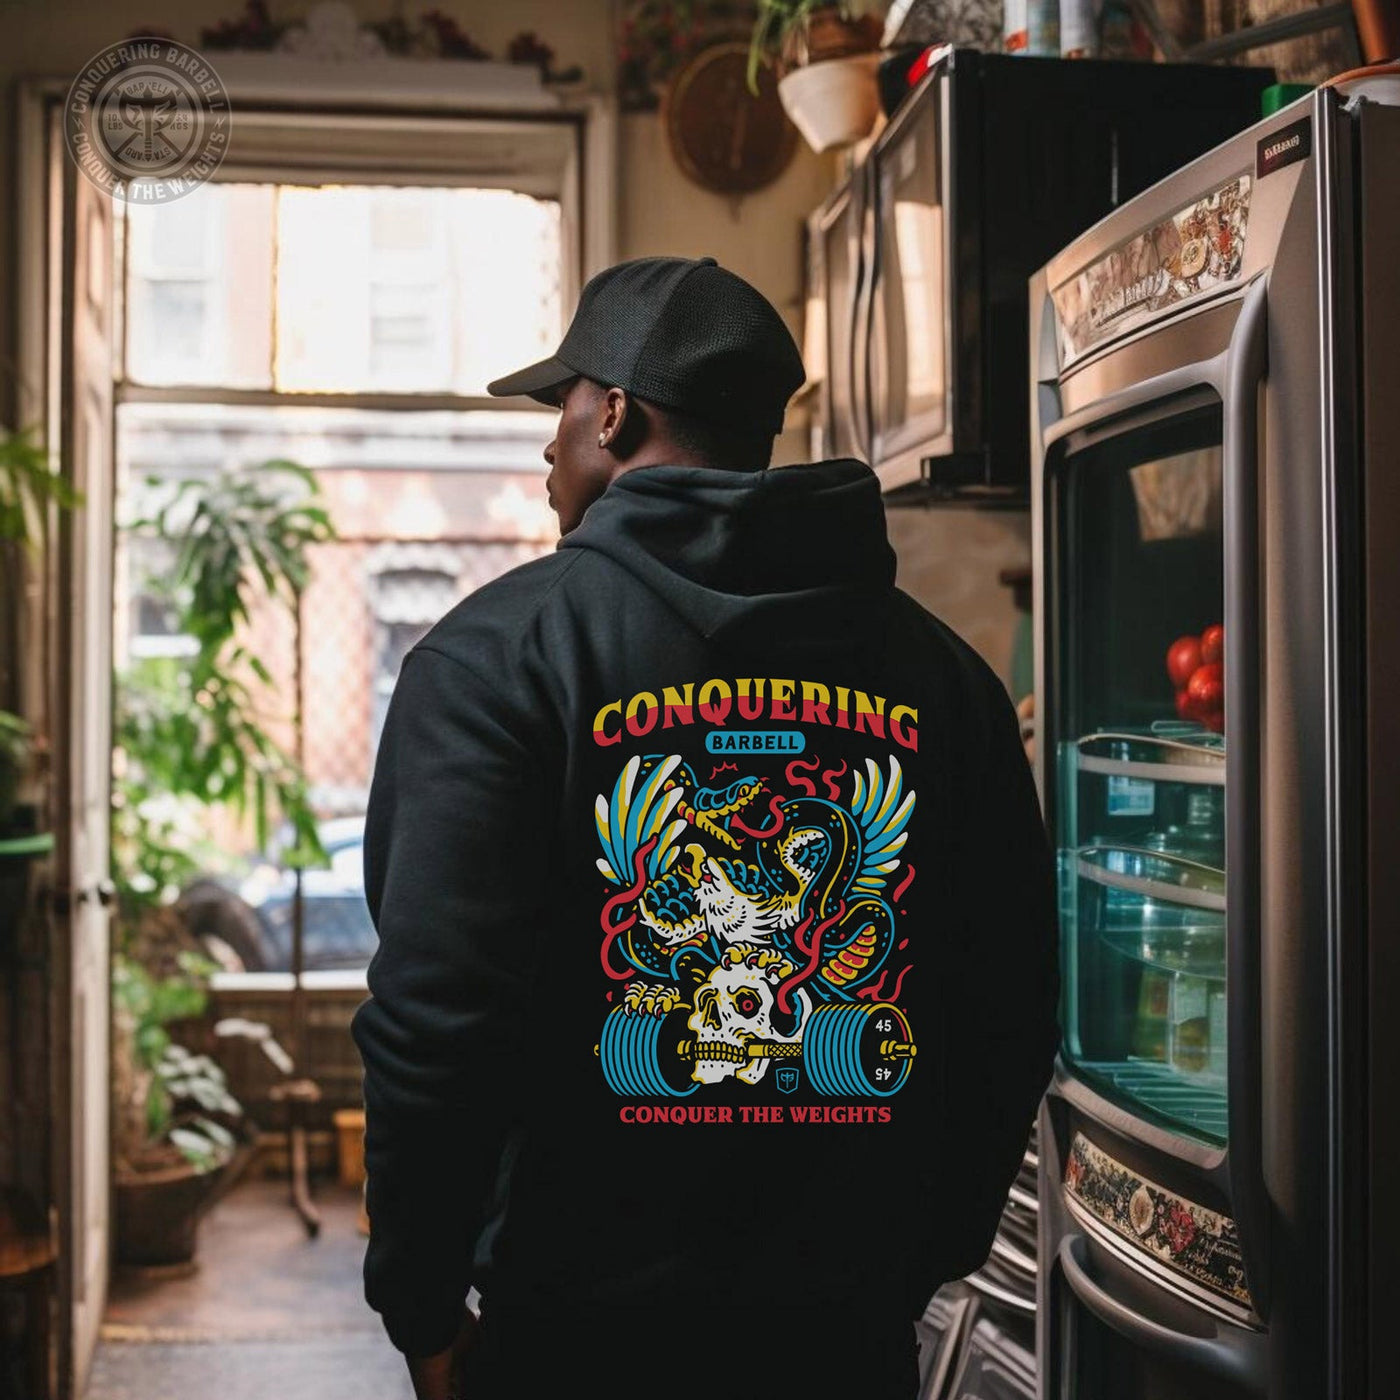 Conquer the Weights - Air Raid - on Black Pullover Hoodie - Conquering Barbell